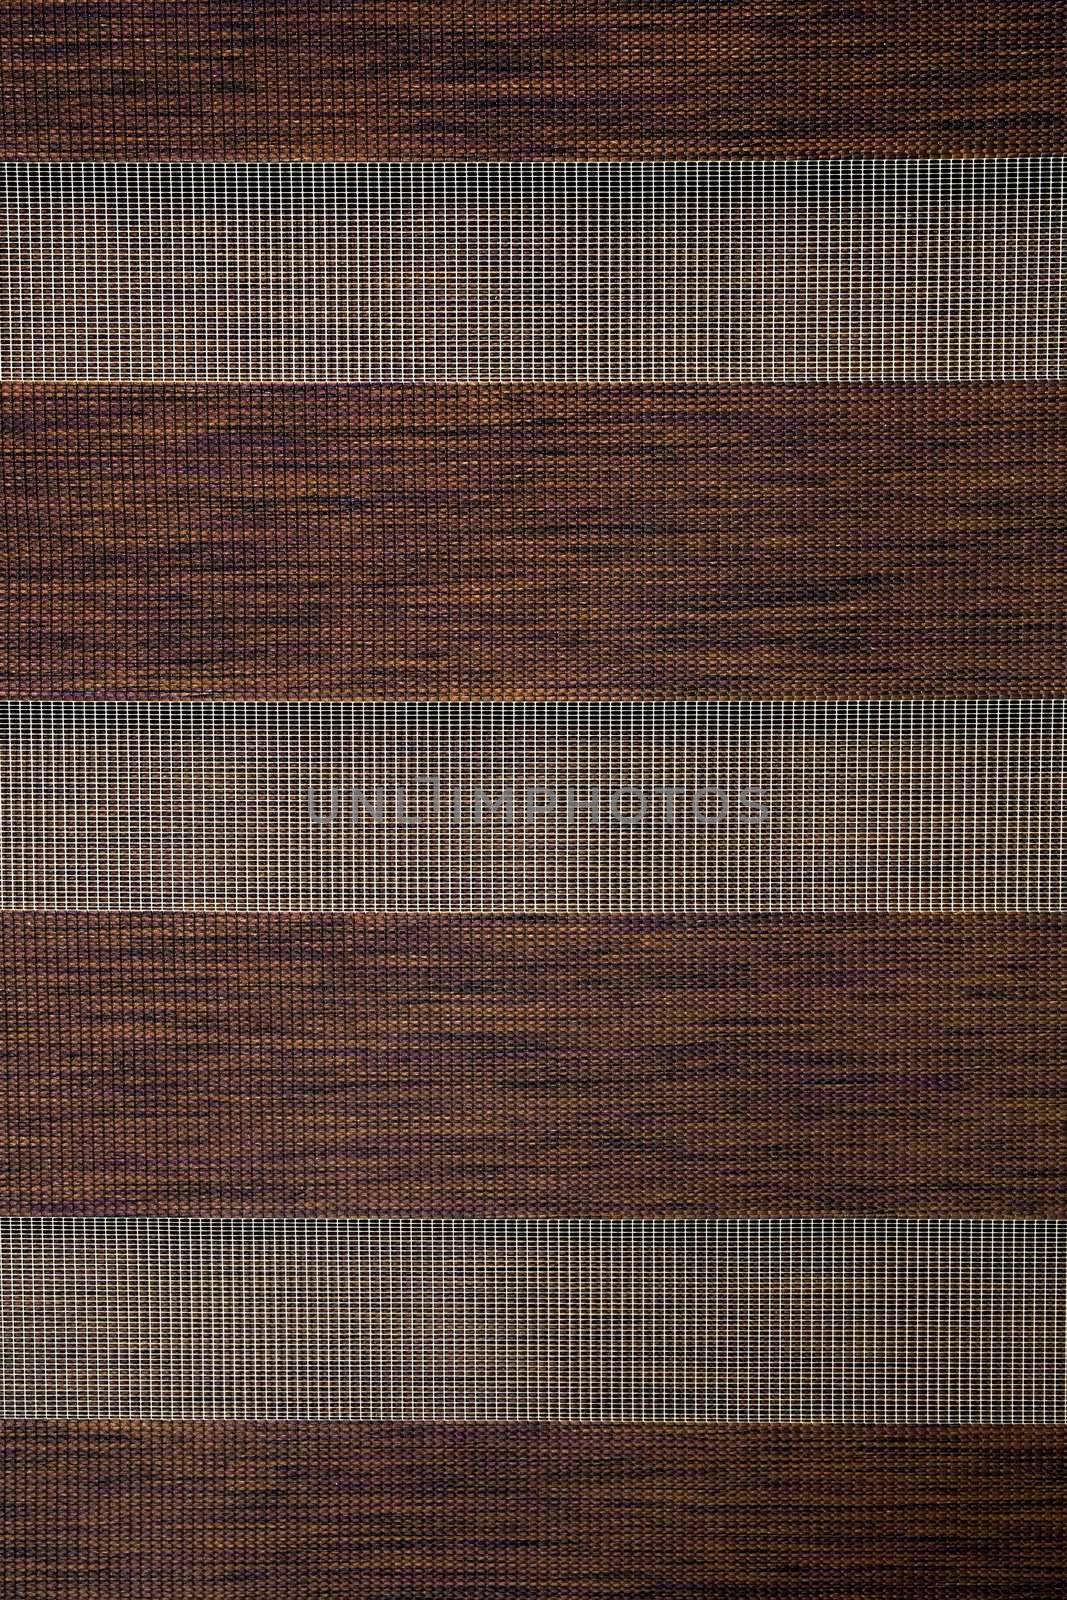 Roller shutter background. Blind texture. by simpson33